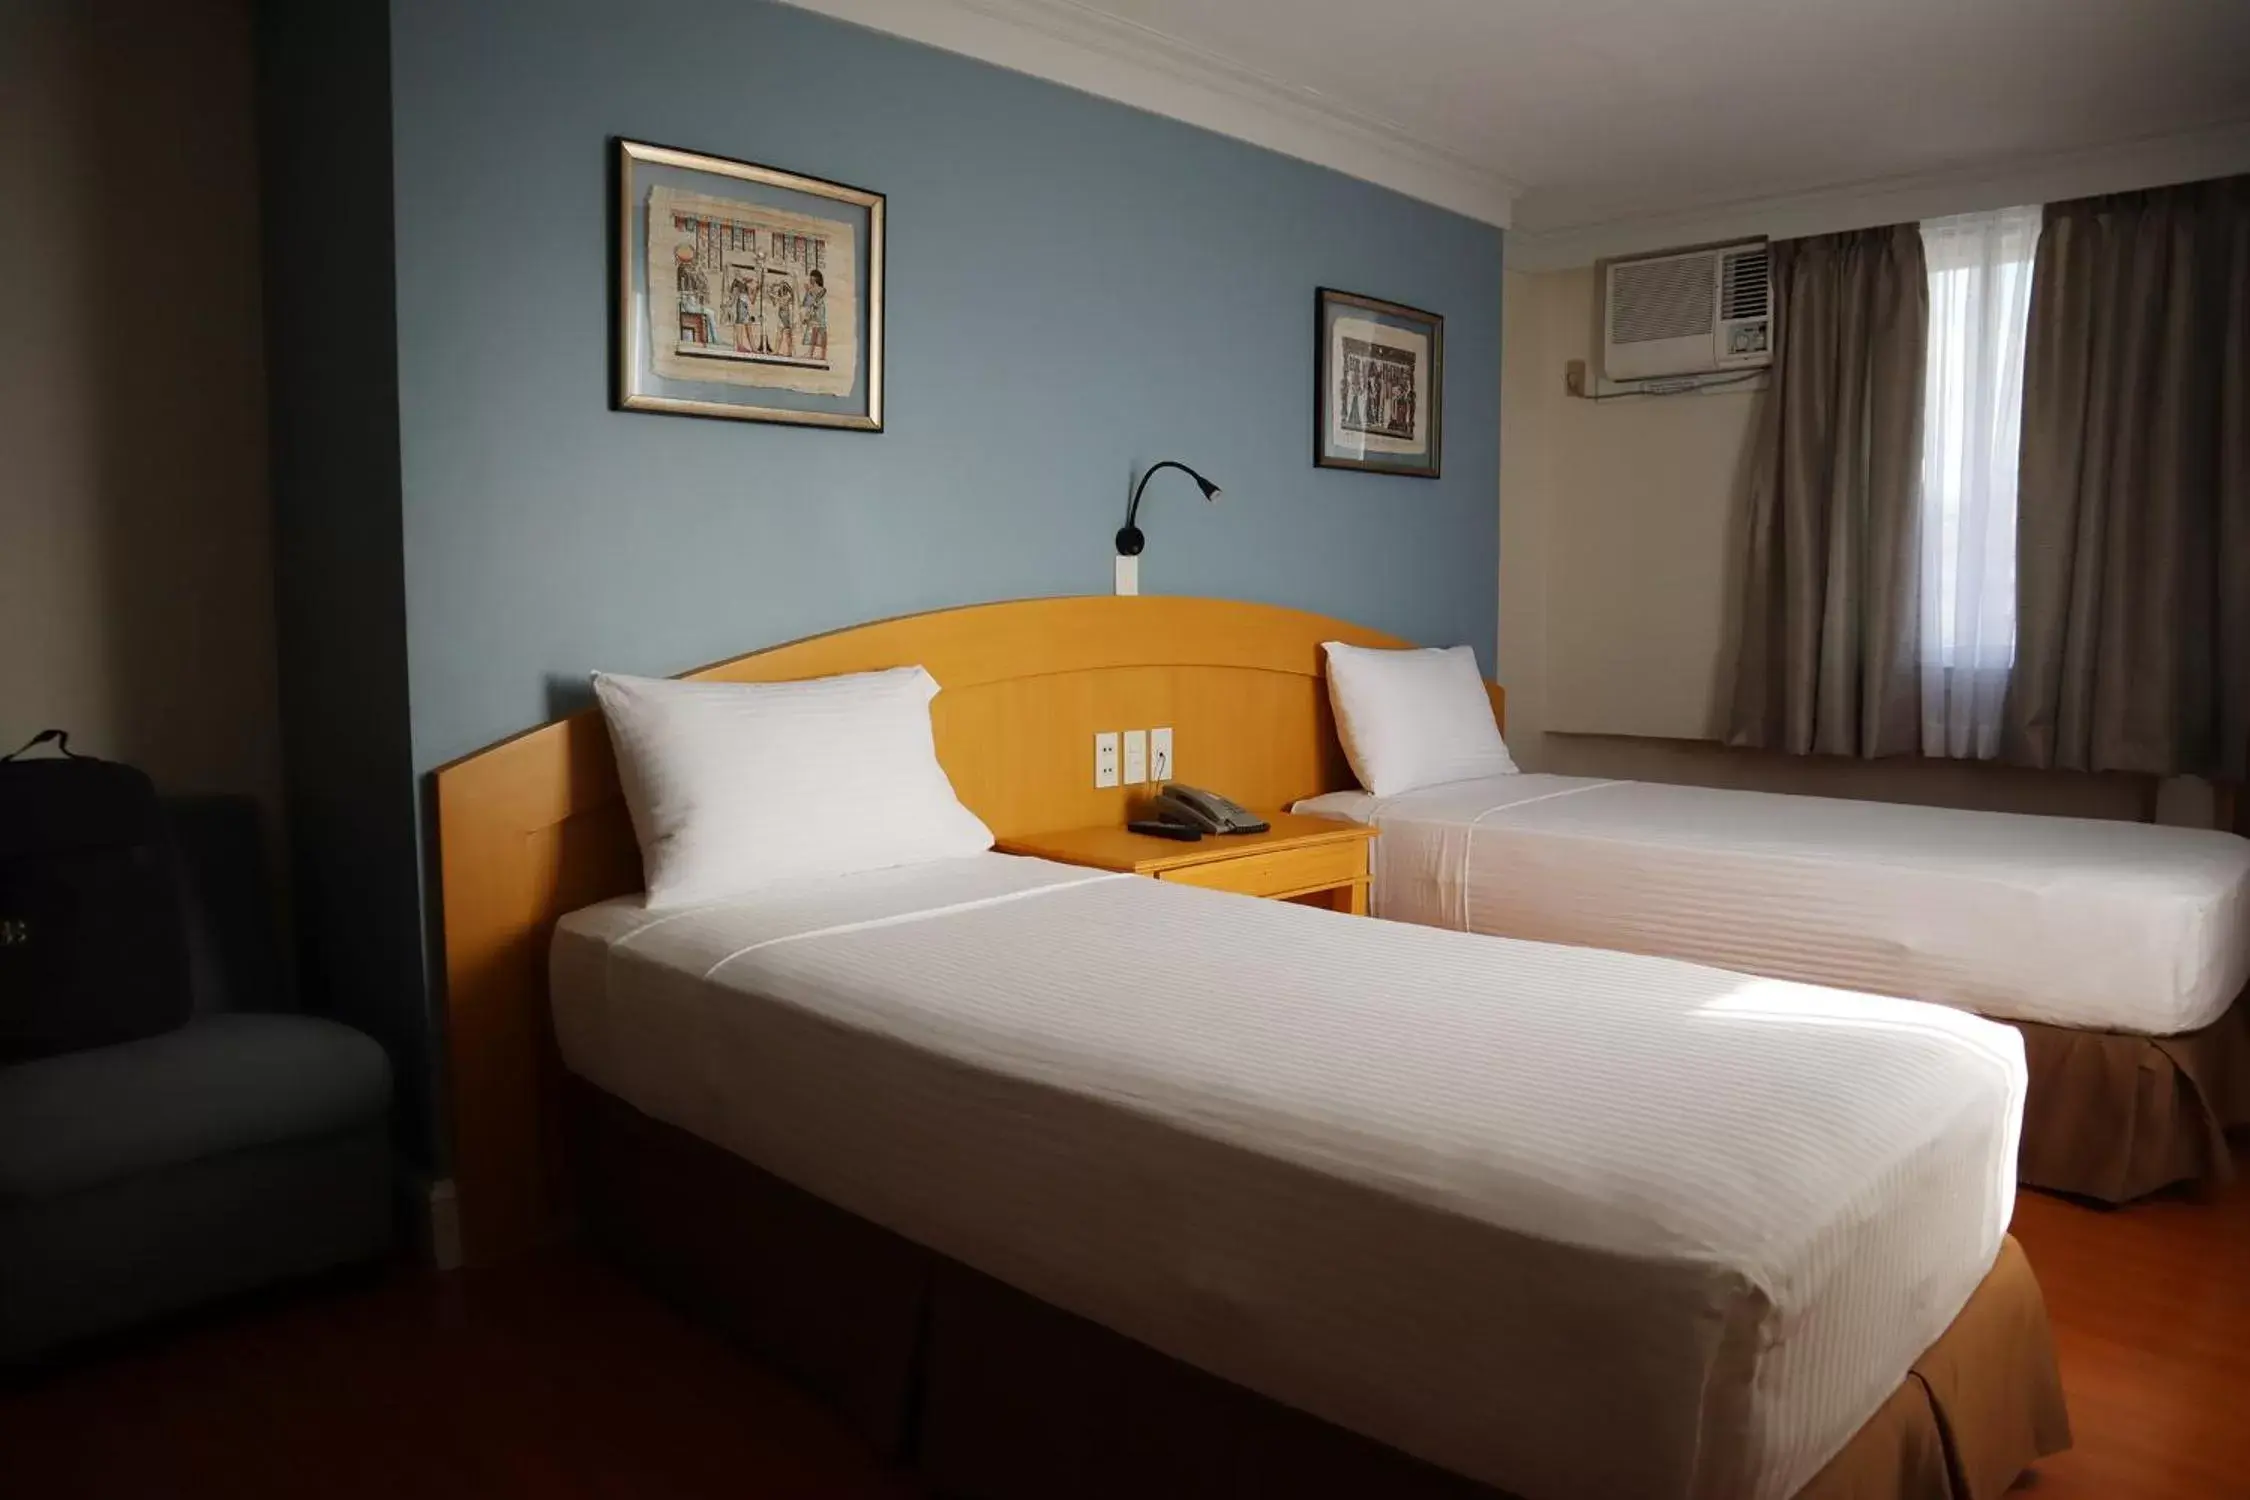 Bed in Fersal Hotel Malakas, Quezon City